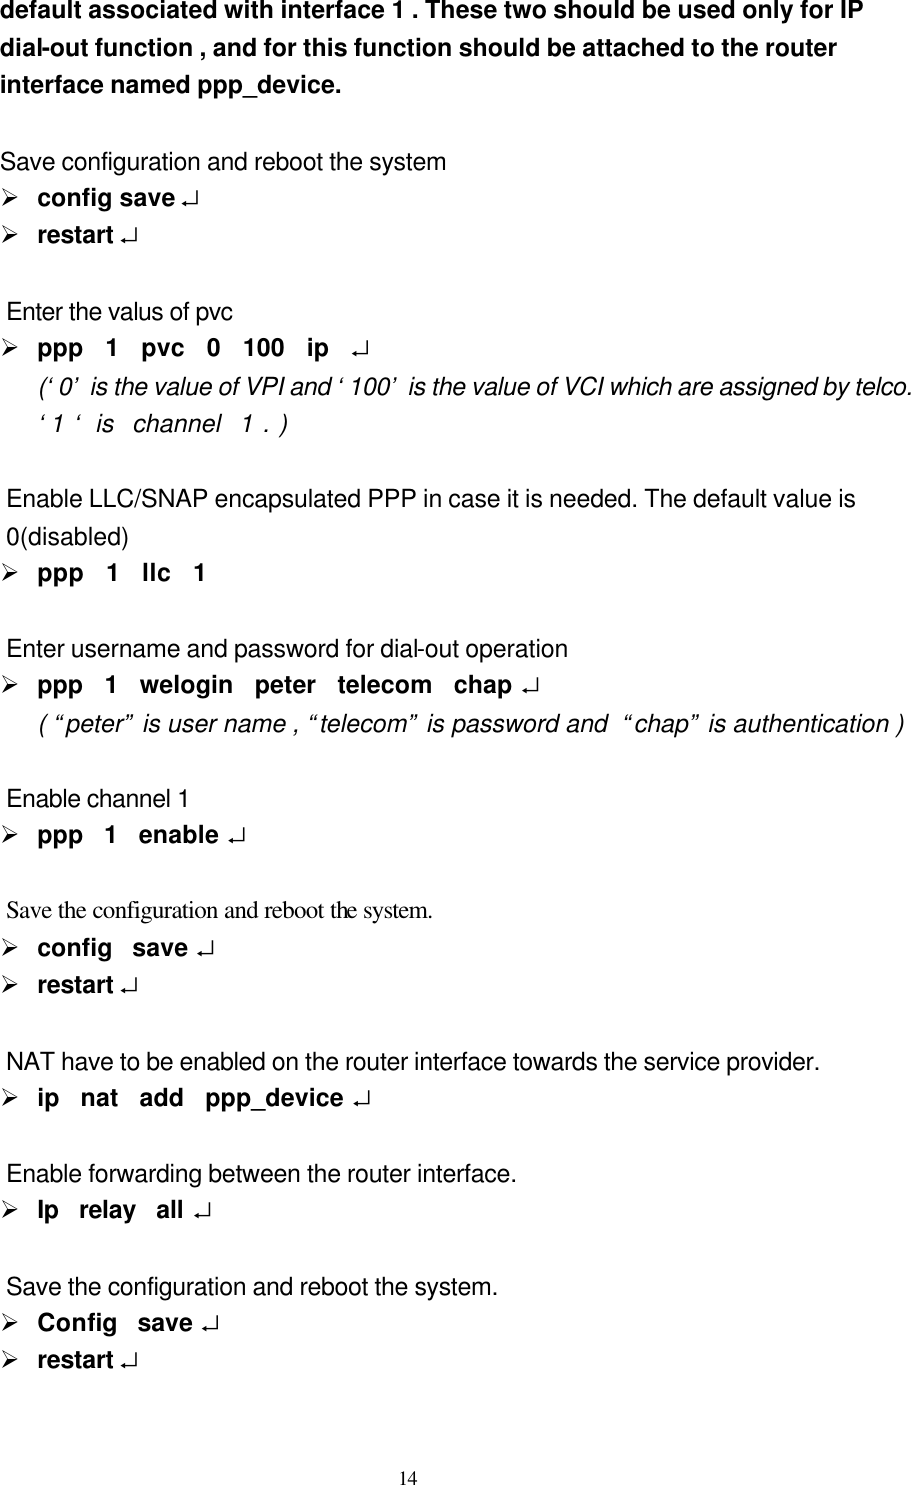  14 default associated with interface 1 . These two should be used only for IP  dial-out function , and for this function should be attached to the router   interface named ppp_device.       Save configuration and reboot the system Ø config save ↵ Ø restart ↵  Enter the valus of pvc Ø ppp  1  pvc  0  100  ip  ↵ (‘0’ is the value of VPI and ‘100’ is the value of VCI which are assigned by telco.  ‘1 ‘ is  channel  1 . )  Enable LLC/SNAP encapsulated PPP in case it is needed. The default value is   0(disabled) Ø ppp  1  llc  1  Enter username and password for dial-out operation Ø ppp  1  welogin  peter  telecom  chap ↵ ( “peter” is user name , “telecom” is password and  “chap” is authentication )    Enable channel 1 Ø ppp  1  enable ↵  Save the configuration and reboot the system. Ø config  save ↵ Ø restart ↵  NAT have to be enabled on the router interface towards the service provider. Ø ip  nat  add  ppp_device ↵  Enable forwarding between the router interface. Ø Ip  relay  all ↵  Save the configuration and reboot the system. Ø Config  save ↵ Ø restart ↵  